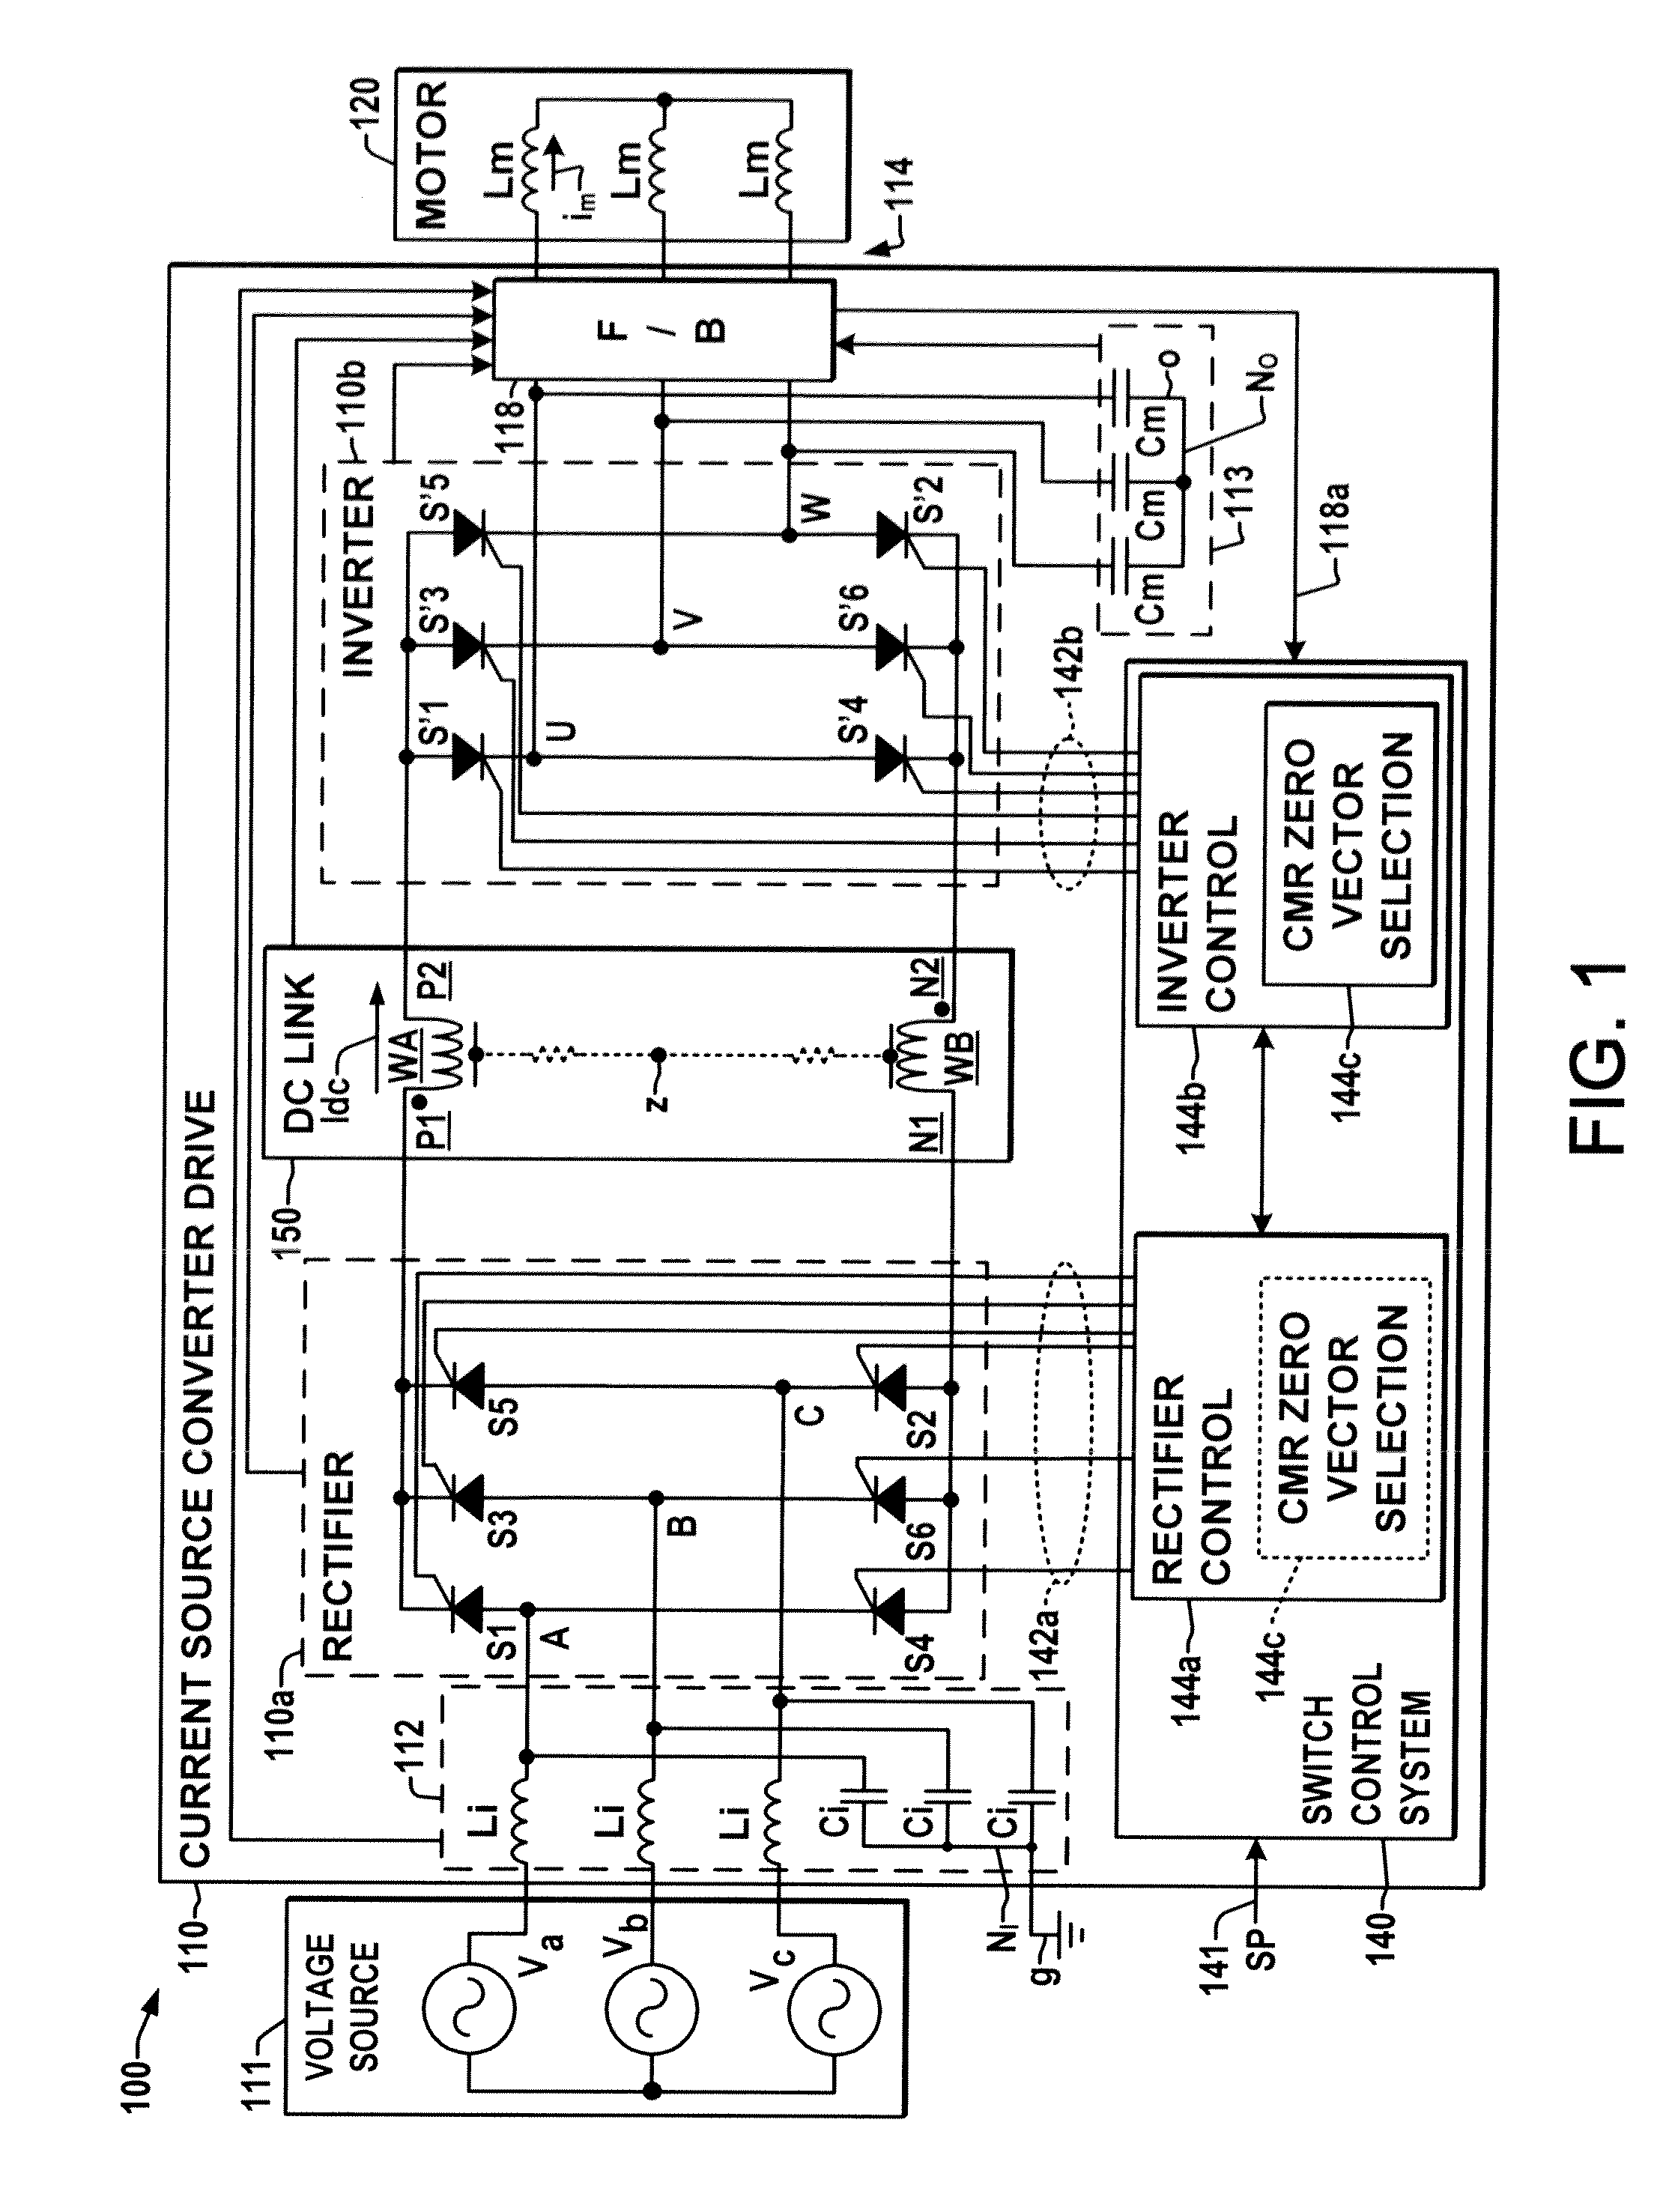 Common mode voltage reduction apparatus and method for current source converter based drive